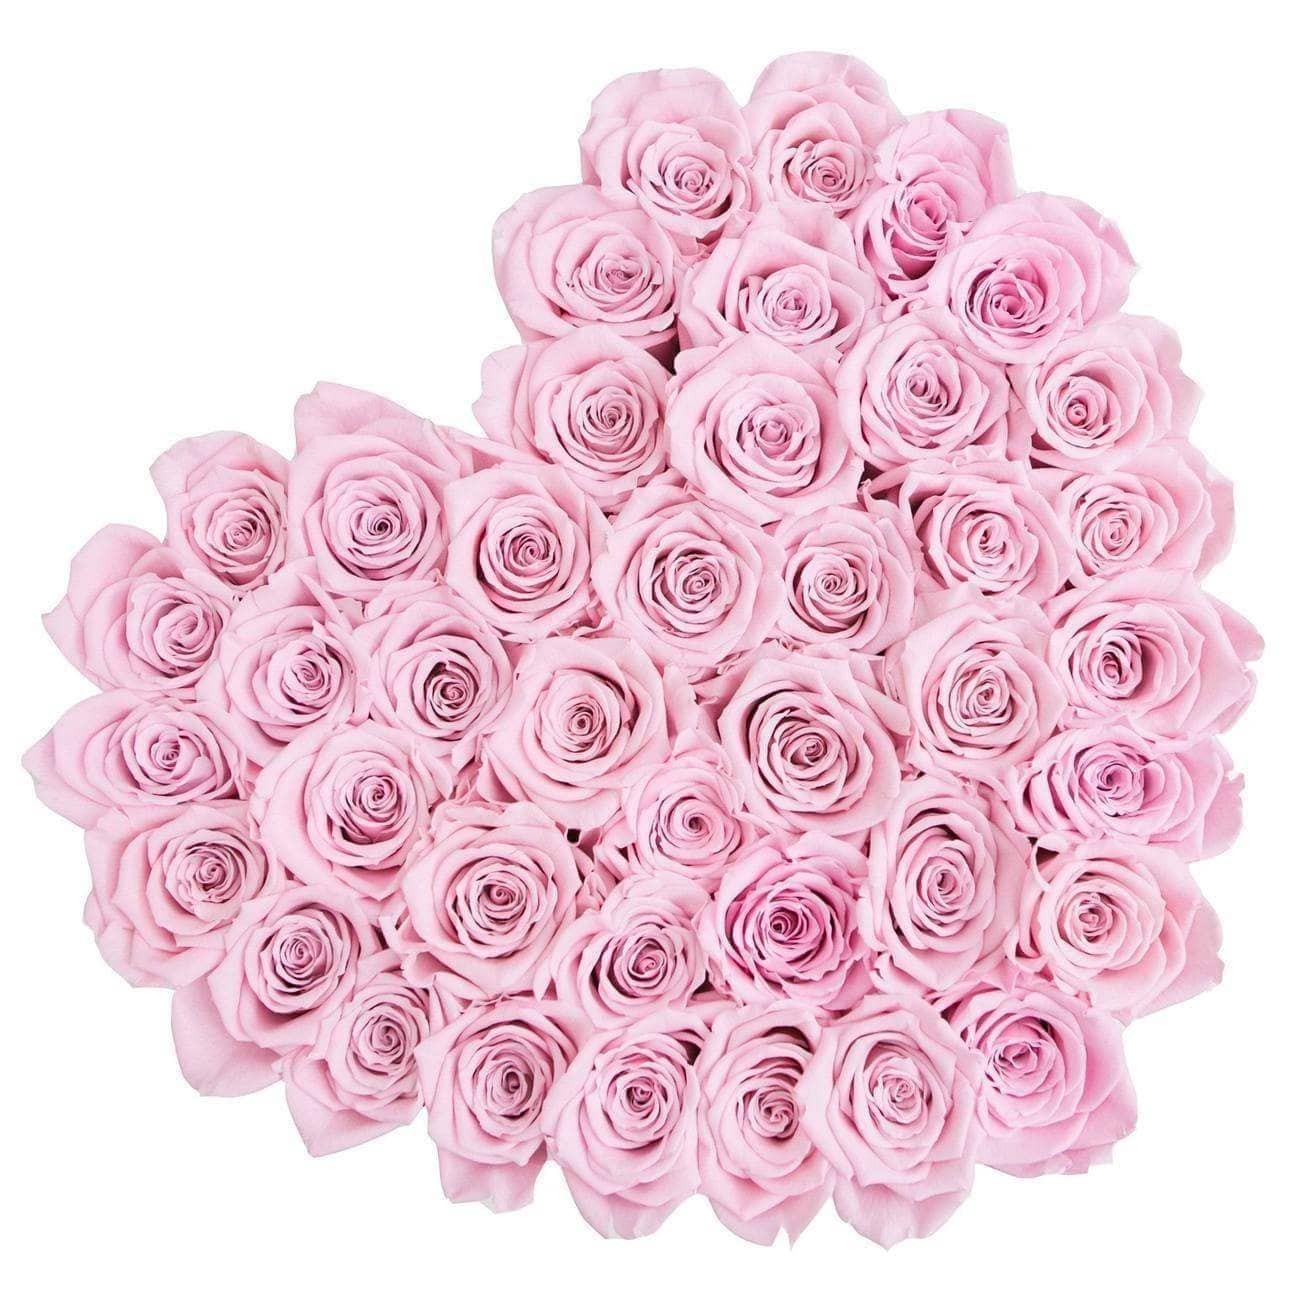 Pink Roses That Last A Year - Love Heart Rose Box